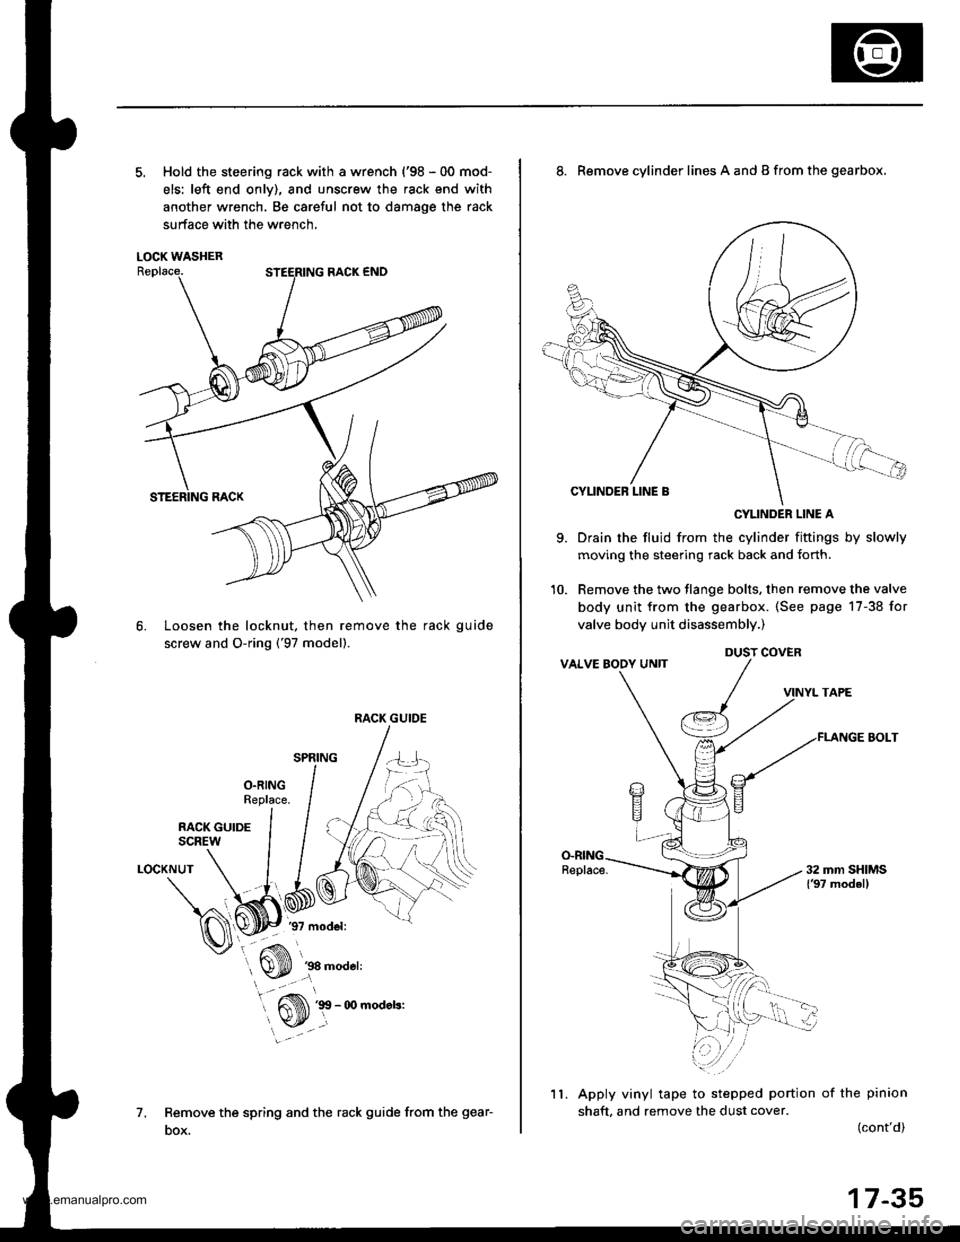 HONDA CR-V 1997 RD1-RD3 / 1.G User Guide 
5. Hold the steering rack with a wrench {98 - 00 mod-
els: left end onlv), and unscrew the rack end with
another wrench, Be careful not to damage the rack
surface with the wrench,
LOCK WASHER
Loosen